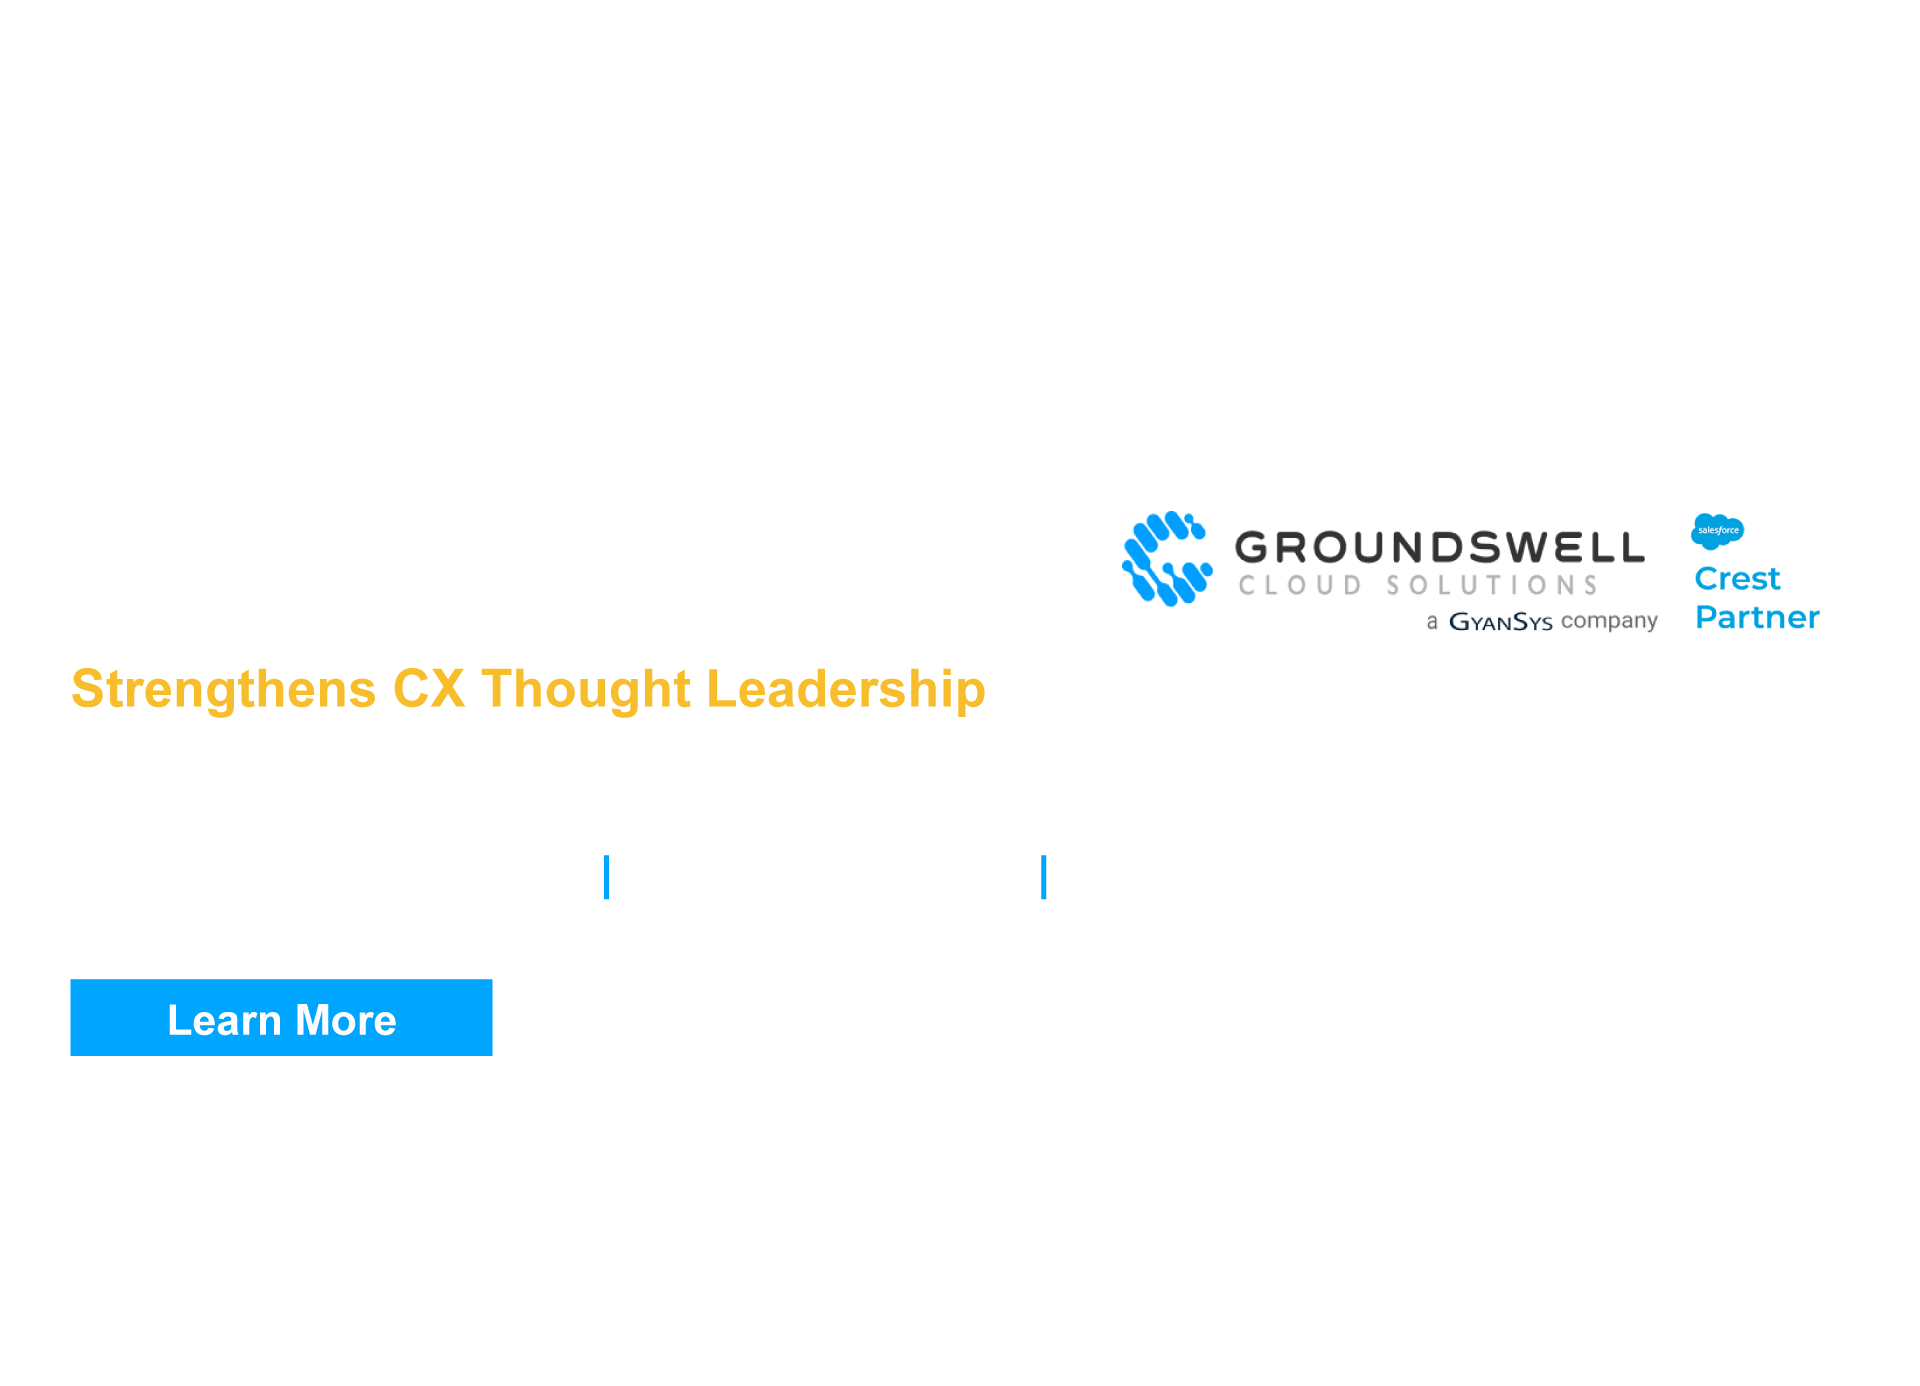 GyanSys Announces Acquisition of Groundswell Cloud Solutions. Click here to read the press release.